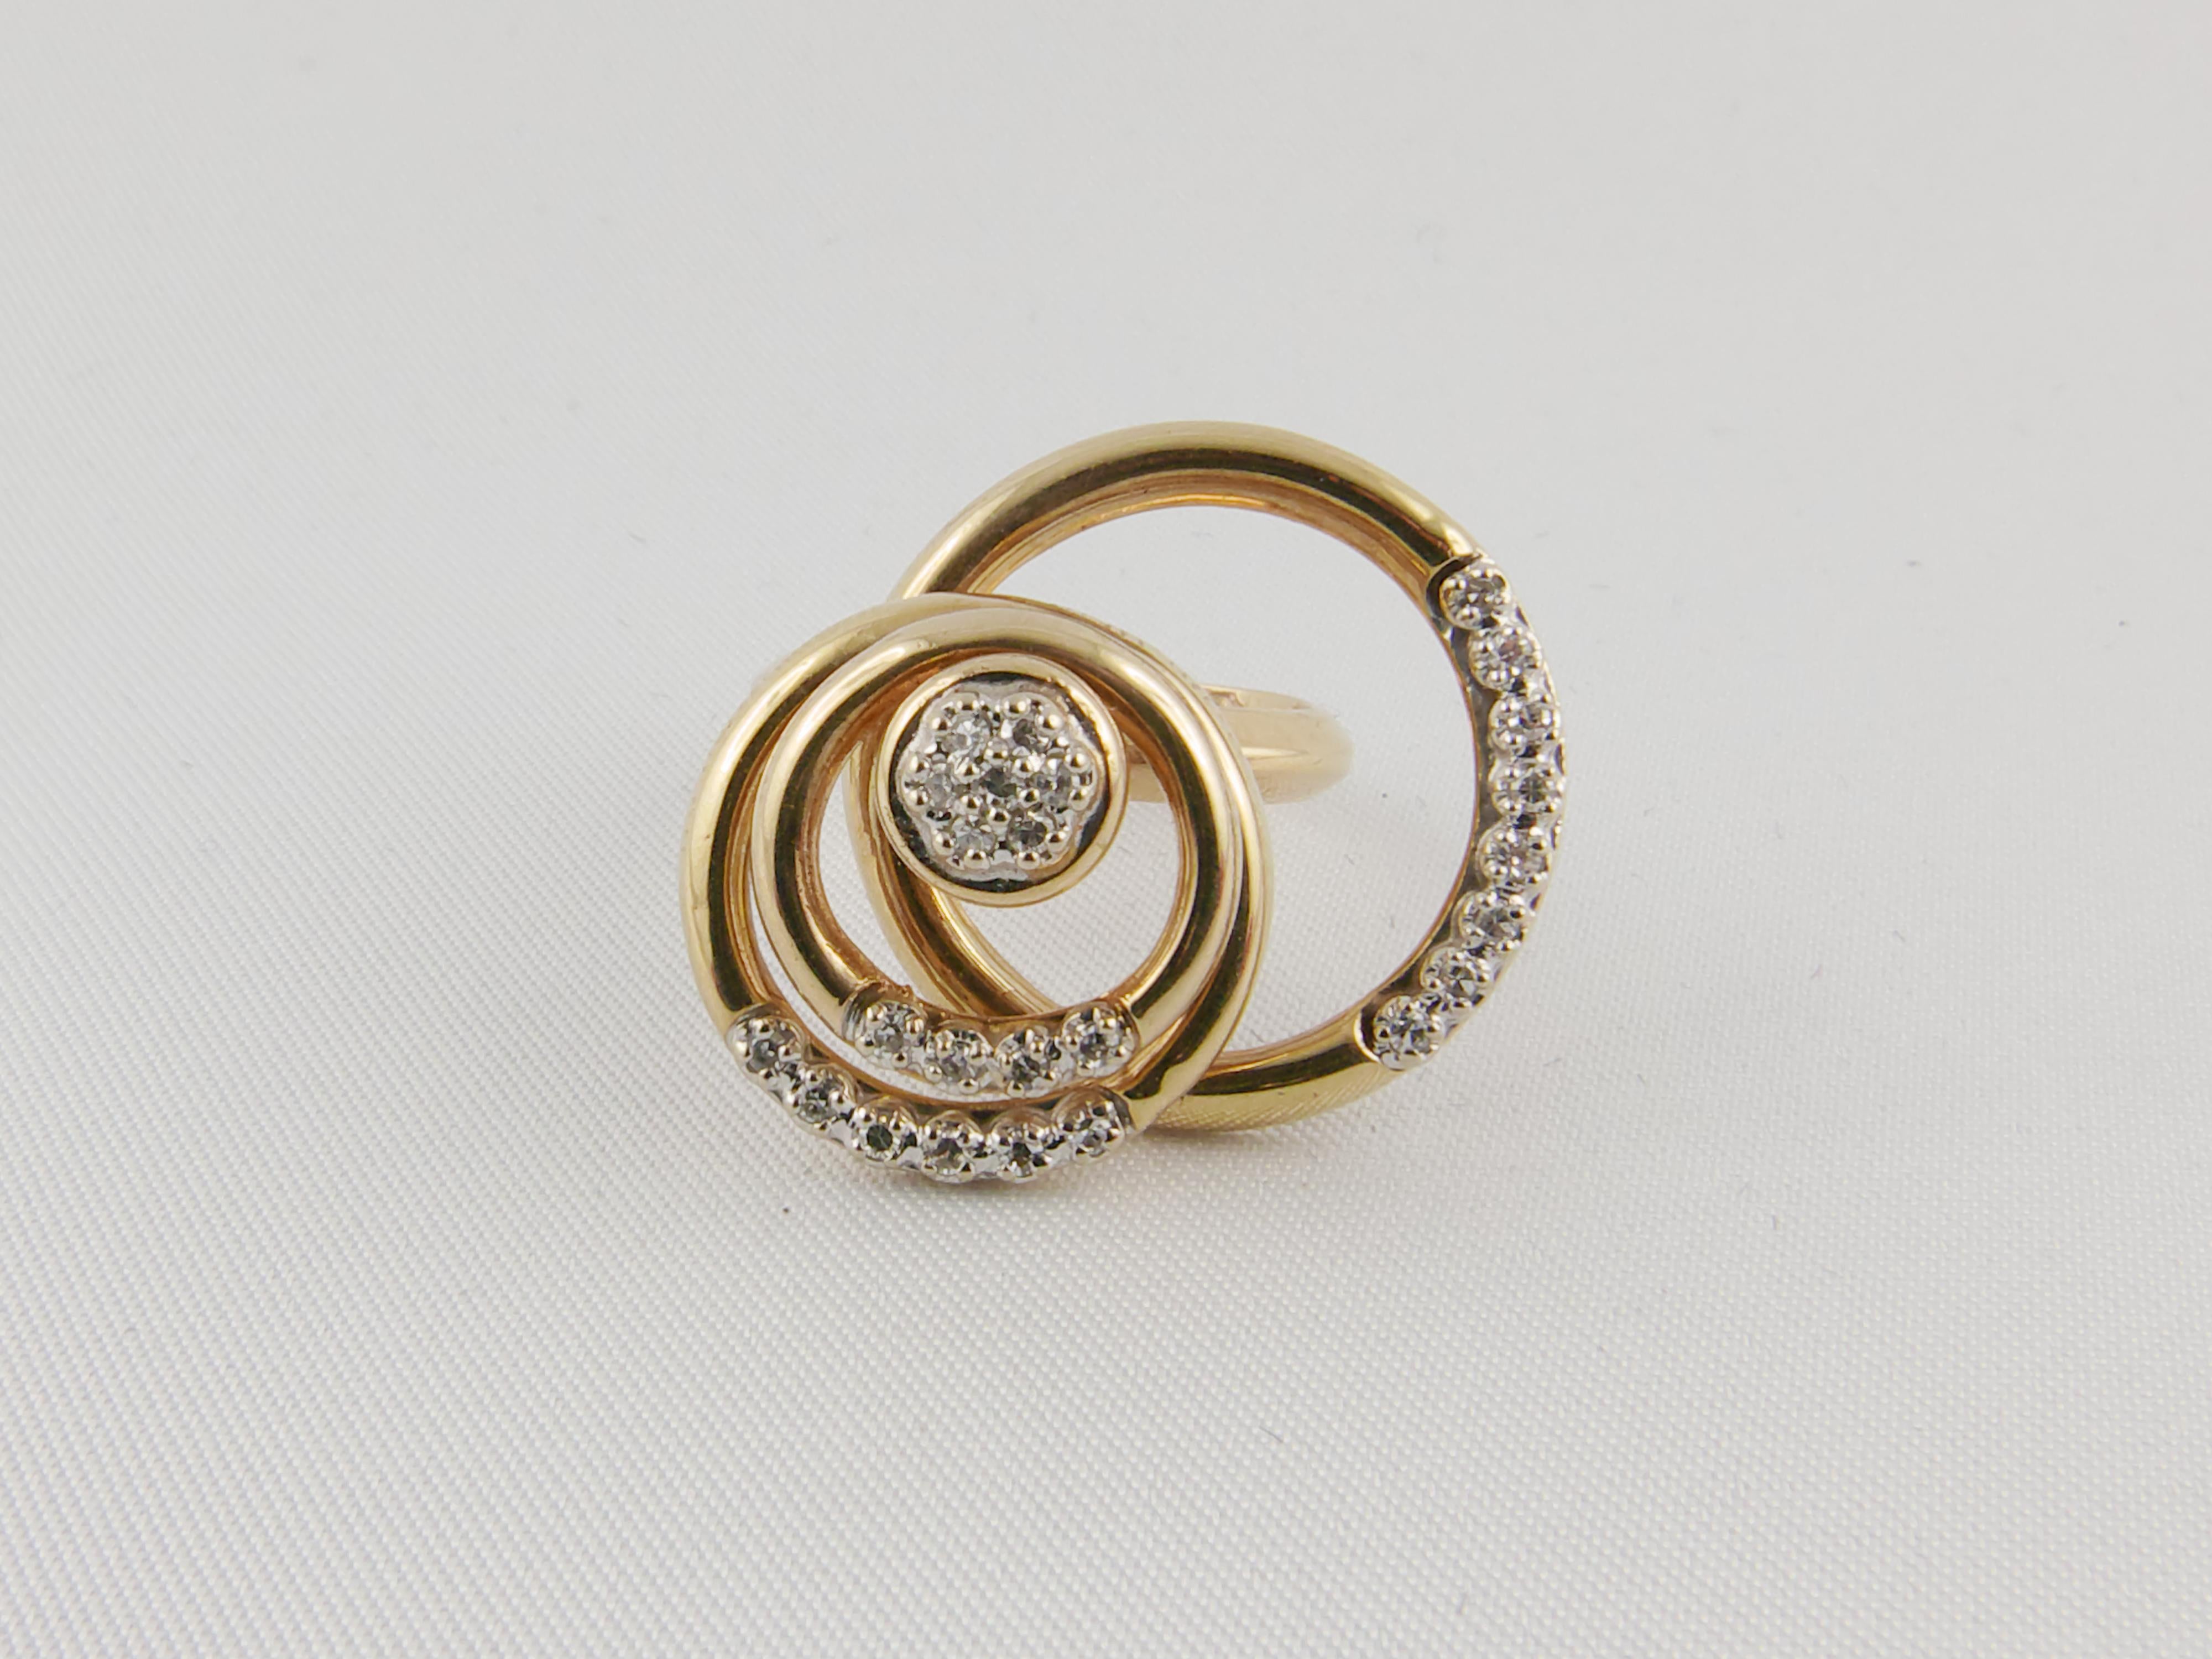 This extremely intriguing 1970s Yellow Gold and Diamond Ring is formed by three Yellow polished Gold spinning Circles adorned with an array of round cut diamonds
When you shake or move your hand the three levels Ring motion parts are rotating 360